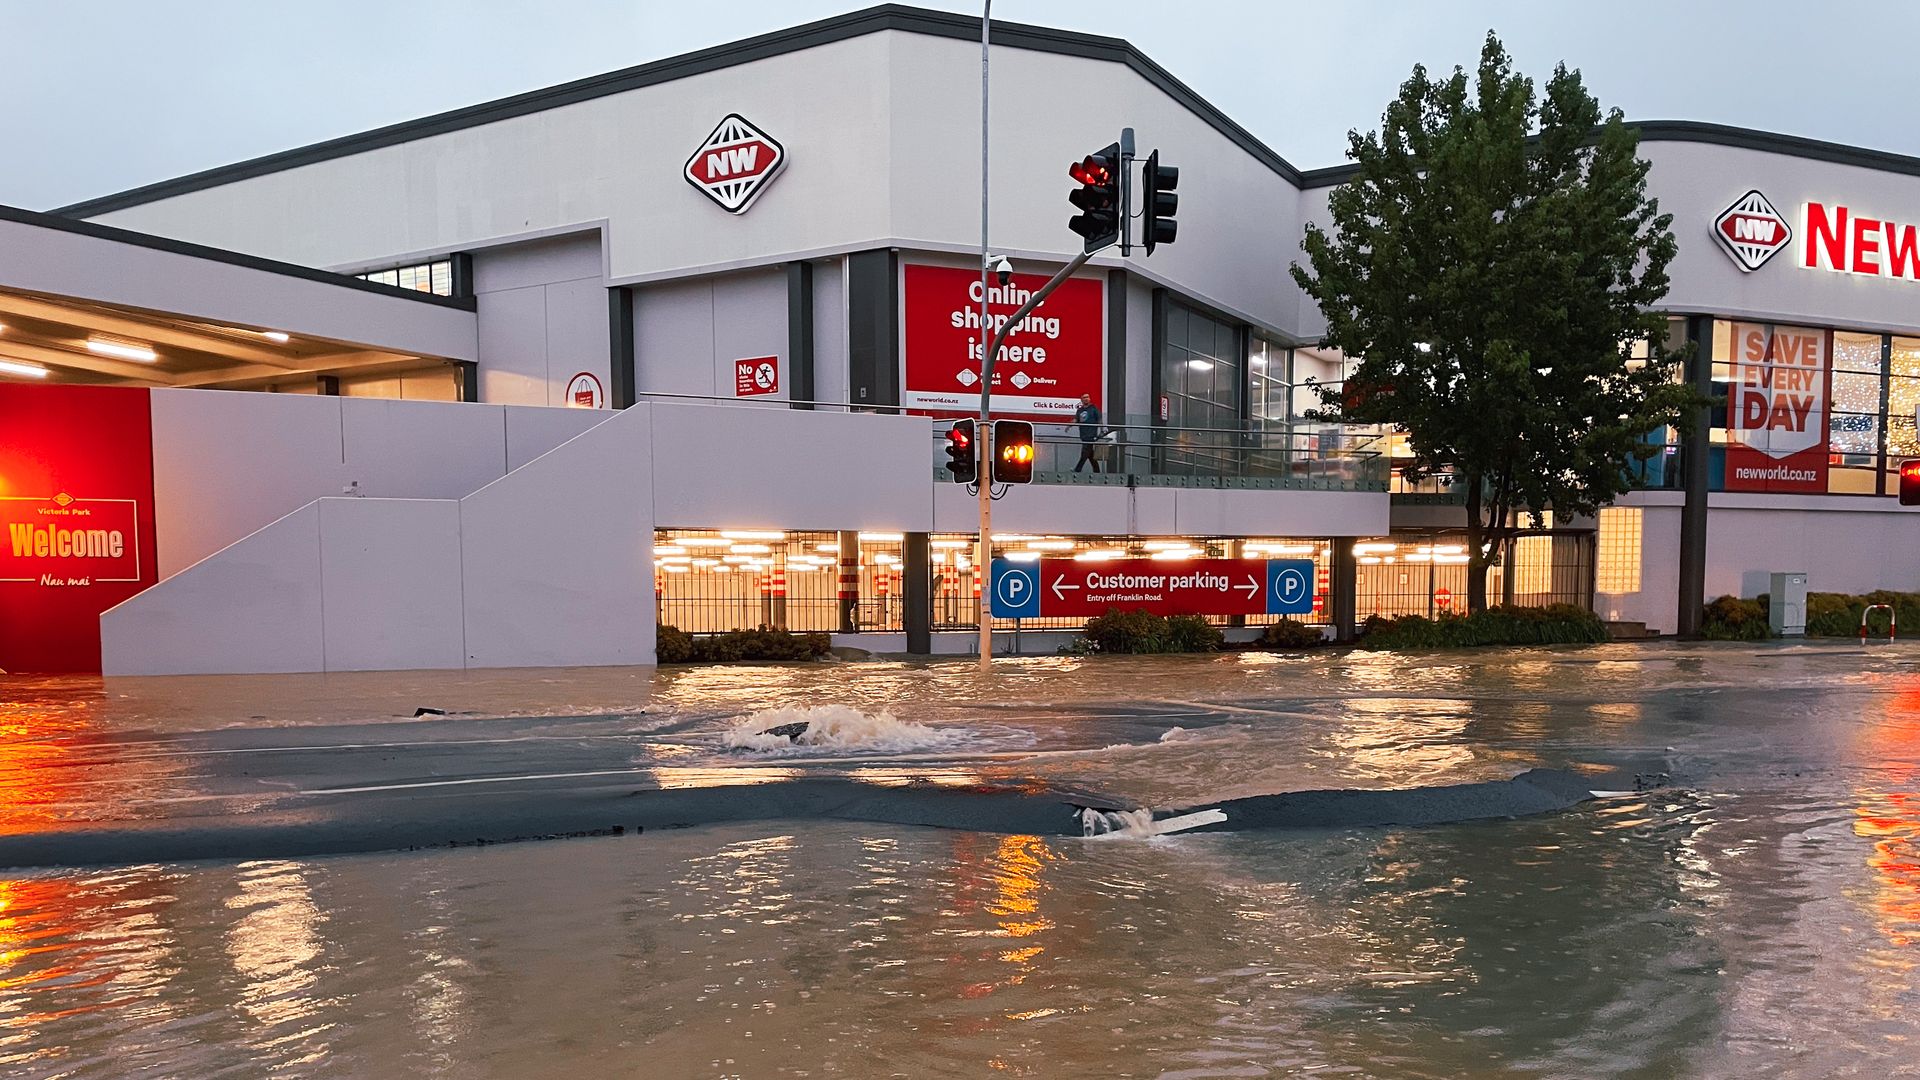 Flooding in Auckland, New Zealand after record rainfall on Jan. 27 2023.